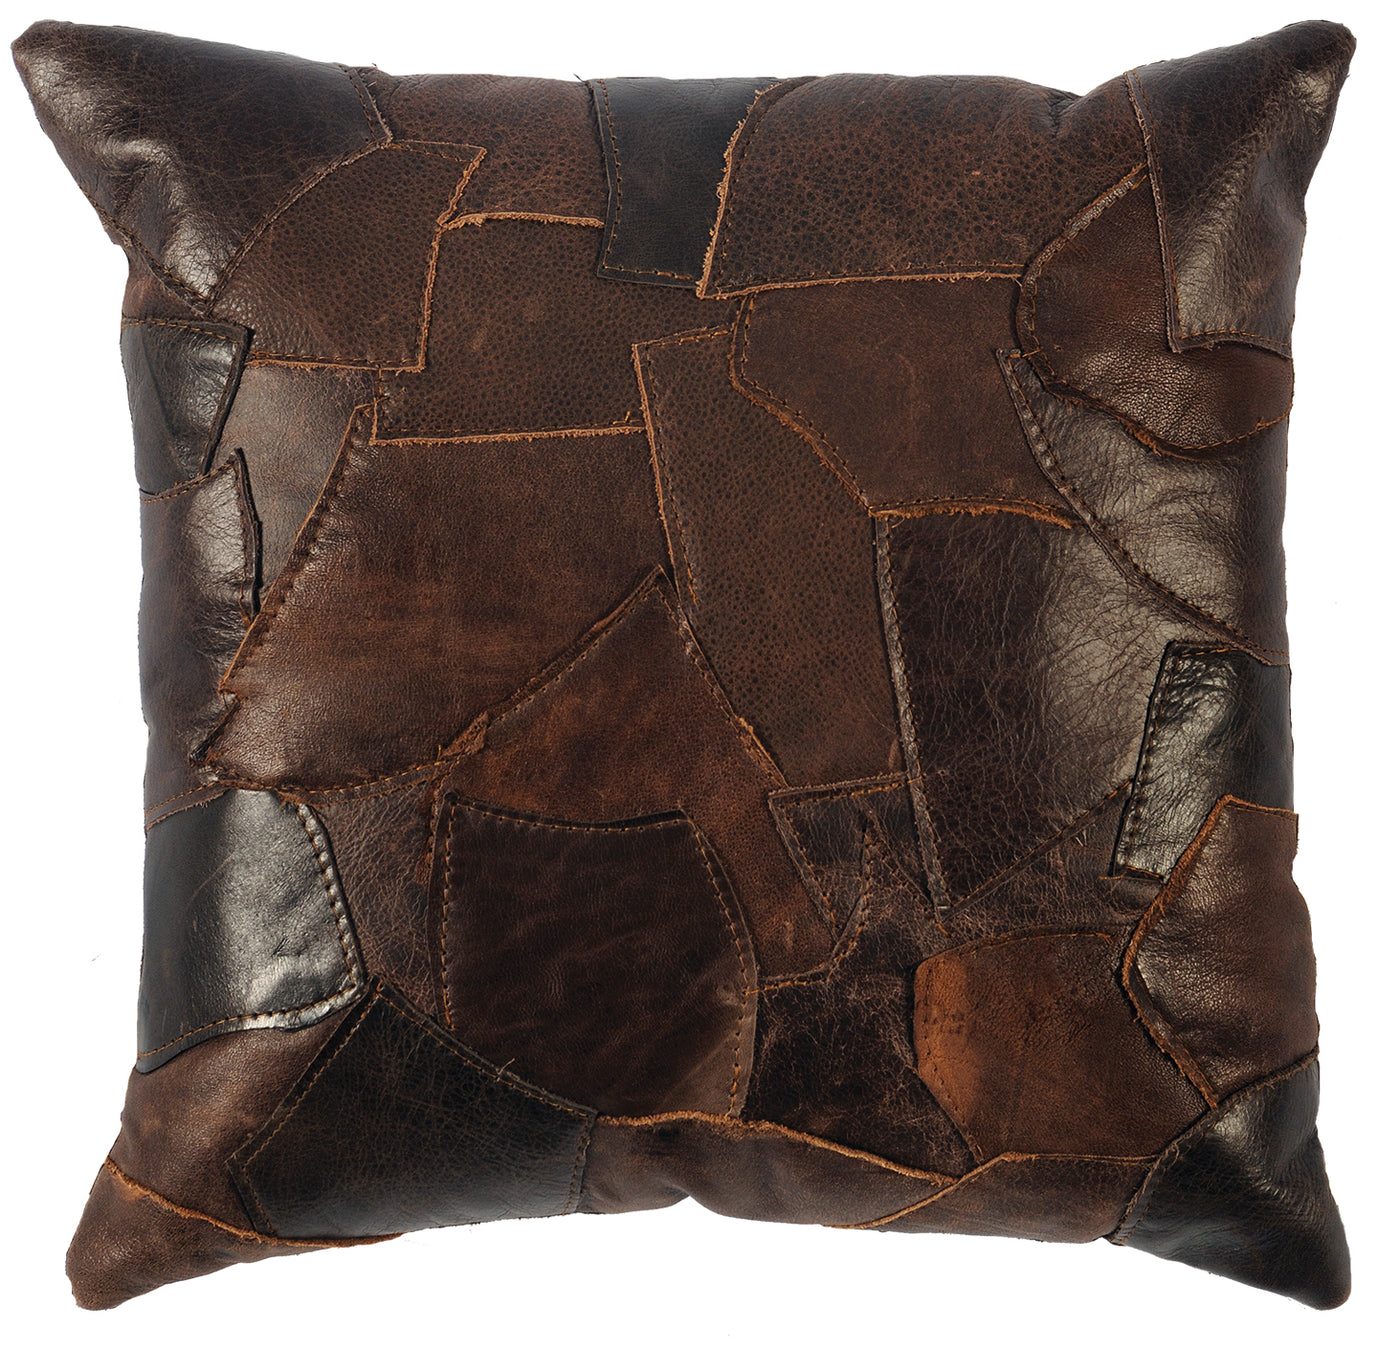 Canvello Patchwork Leather Pillow (16"x16")